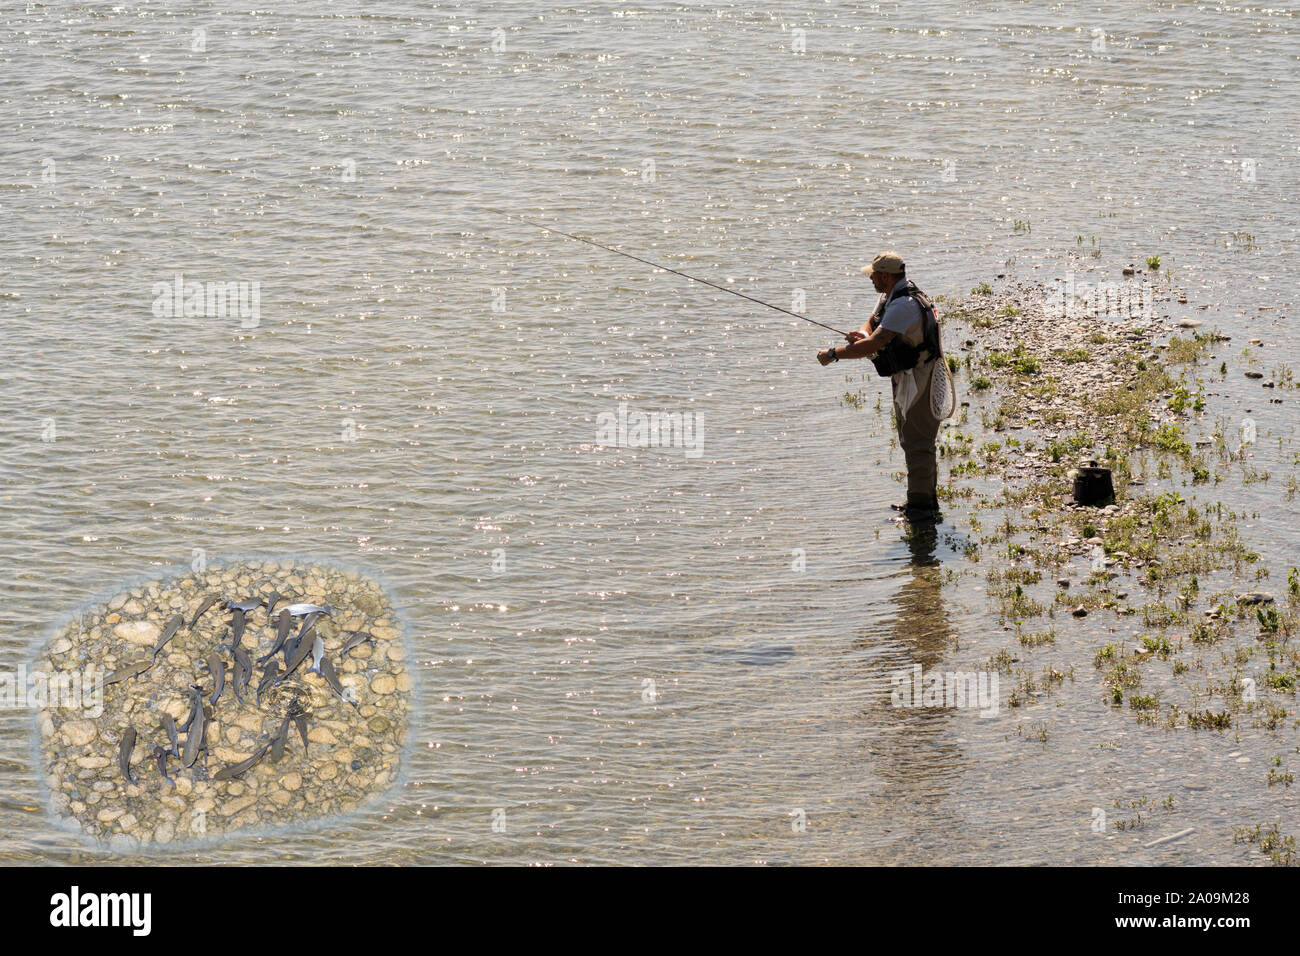 Man fishing in the river Roia with an inset of fish swimming nearby, in Ventimiglia, Liguria, Italy, Europe Stock Photo